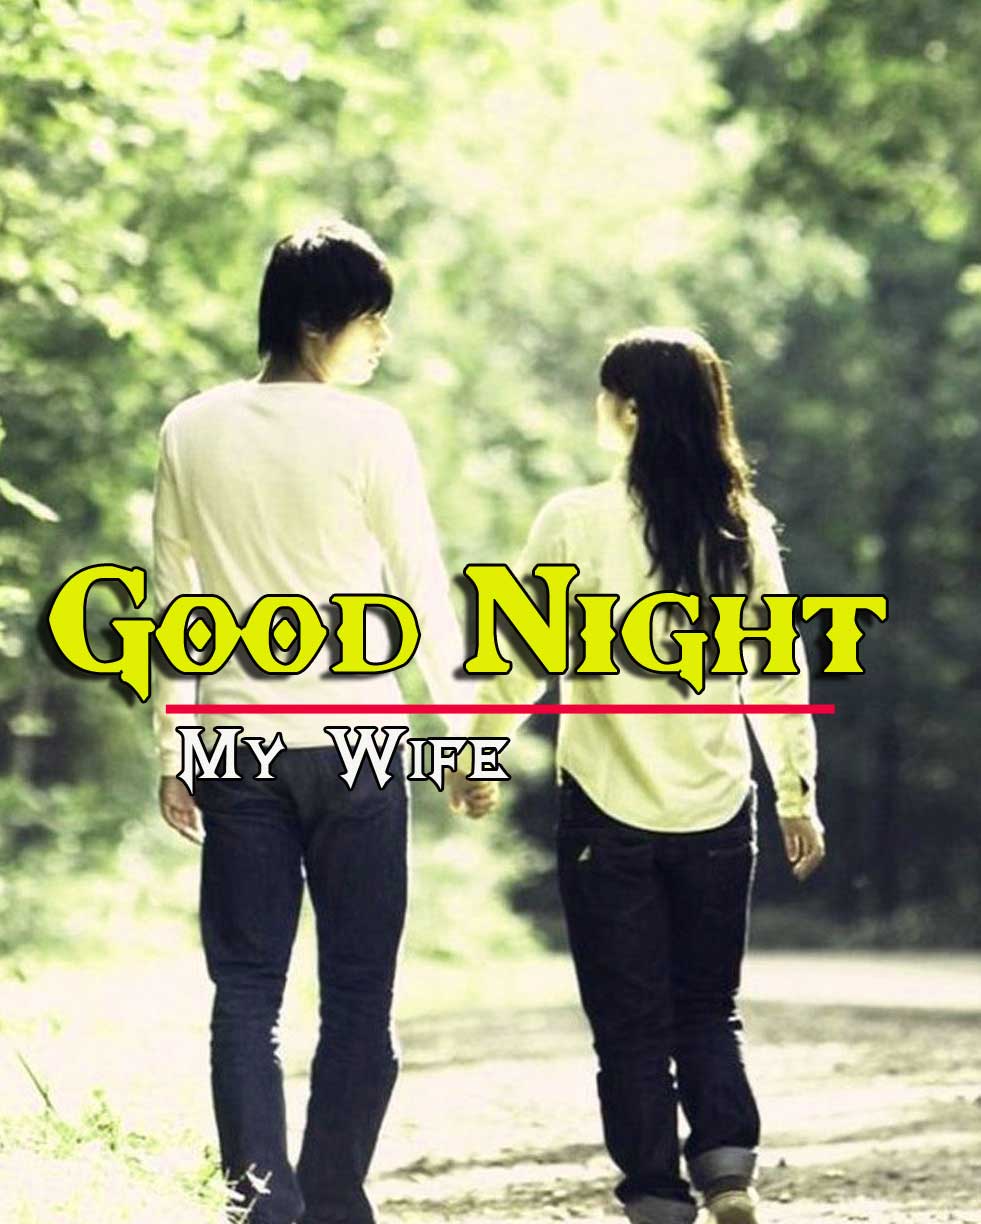 Good Night Wishes Images Pics HD Download 